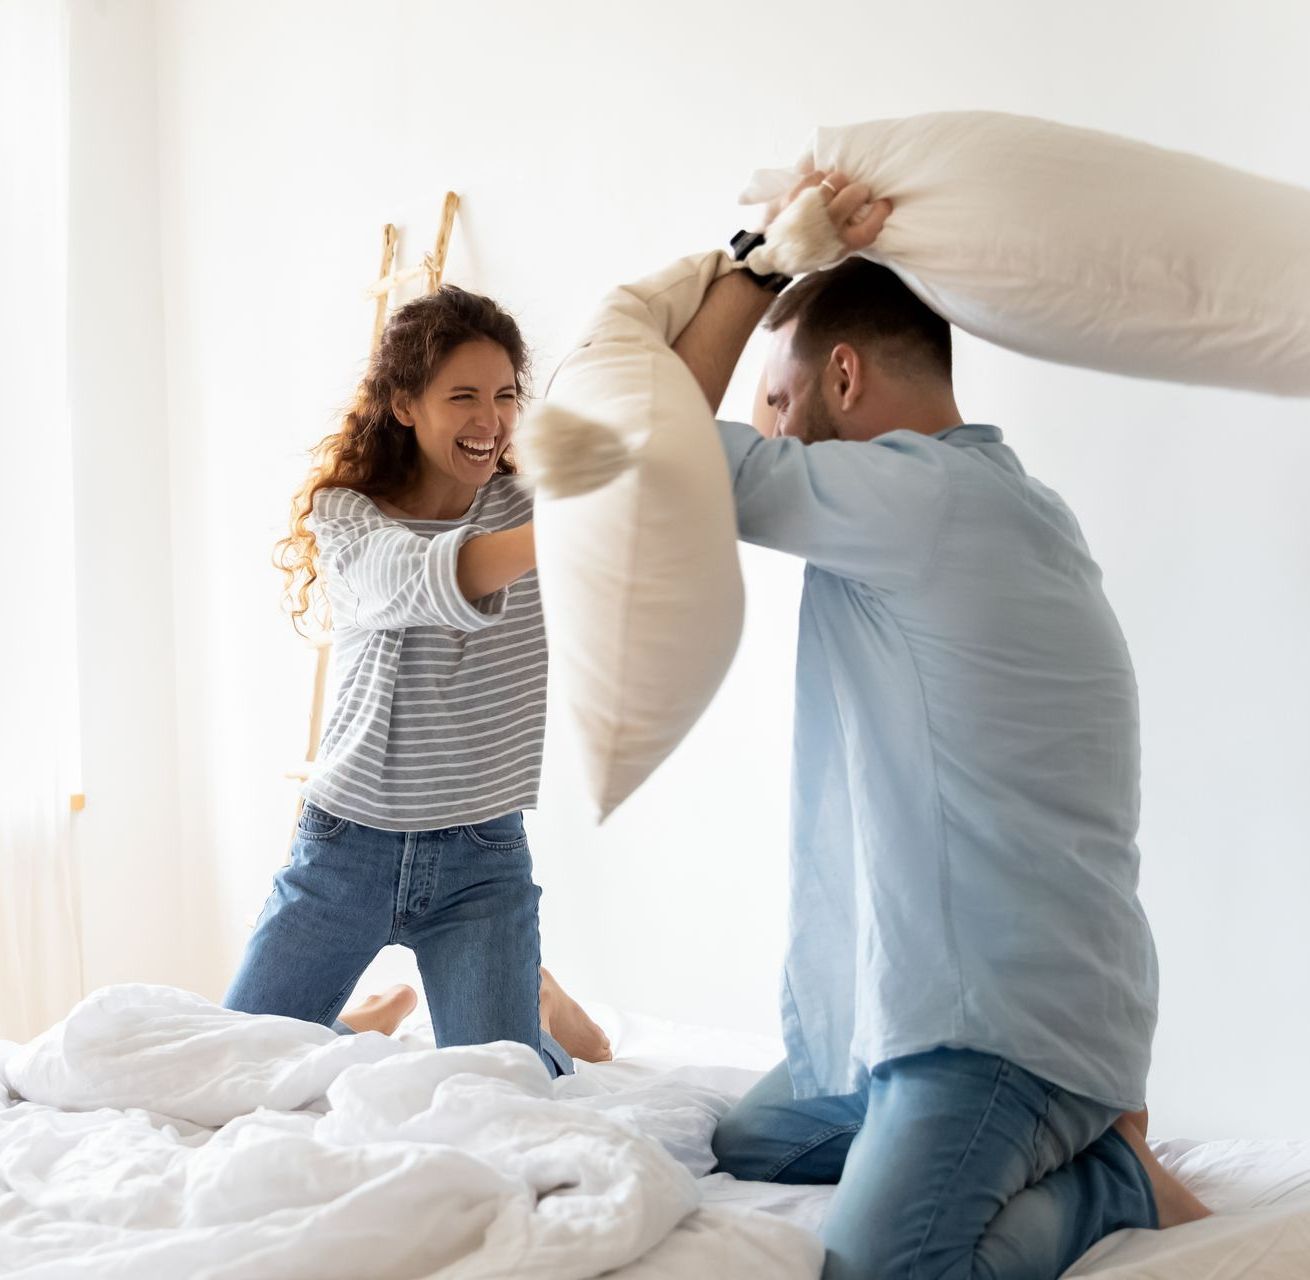 The same couple from above is shown having a friendly pillow fight, they are comfortable with one another because they know the importance of date night